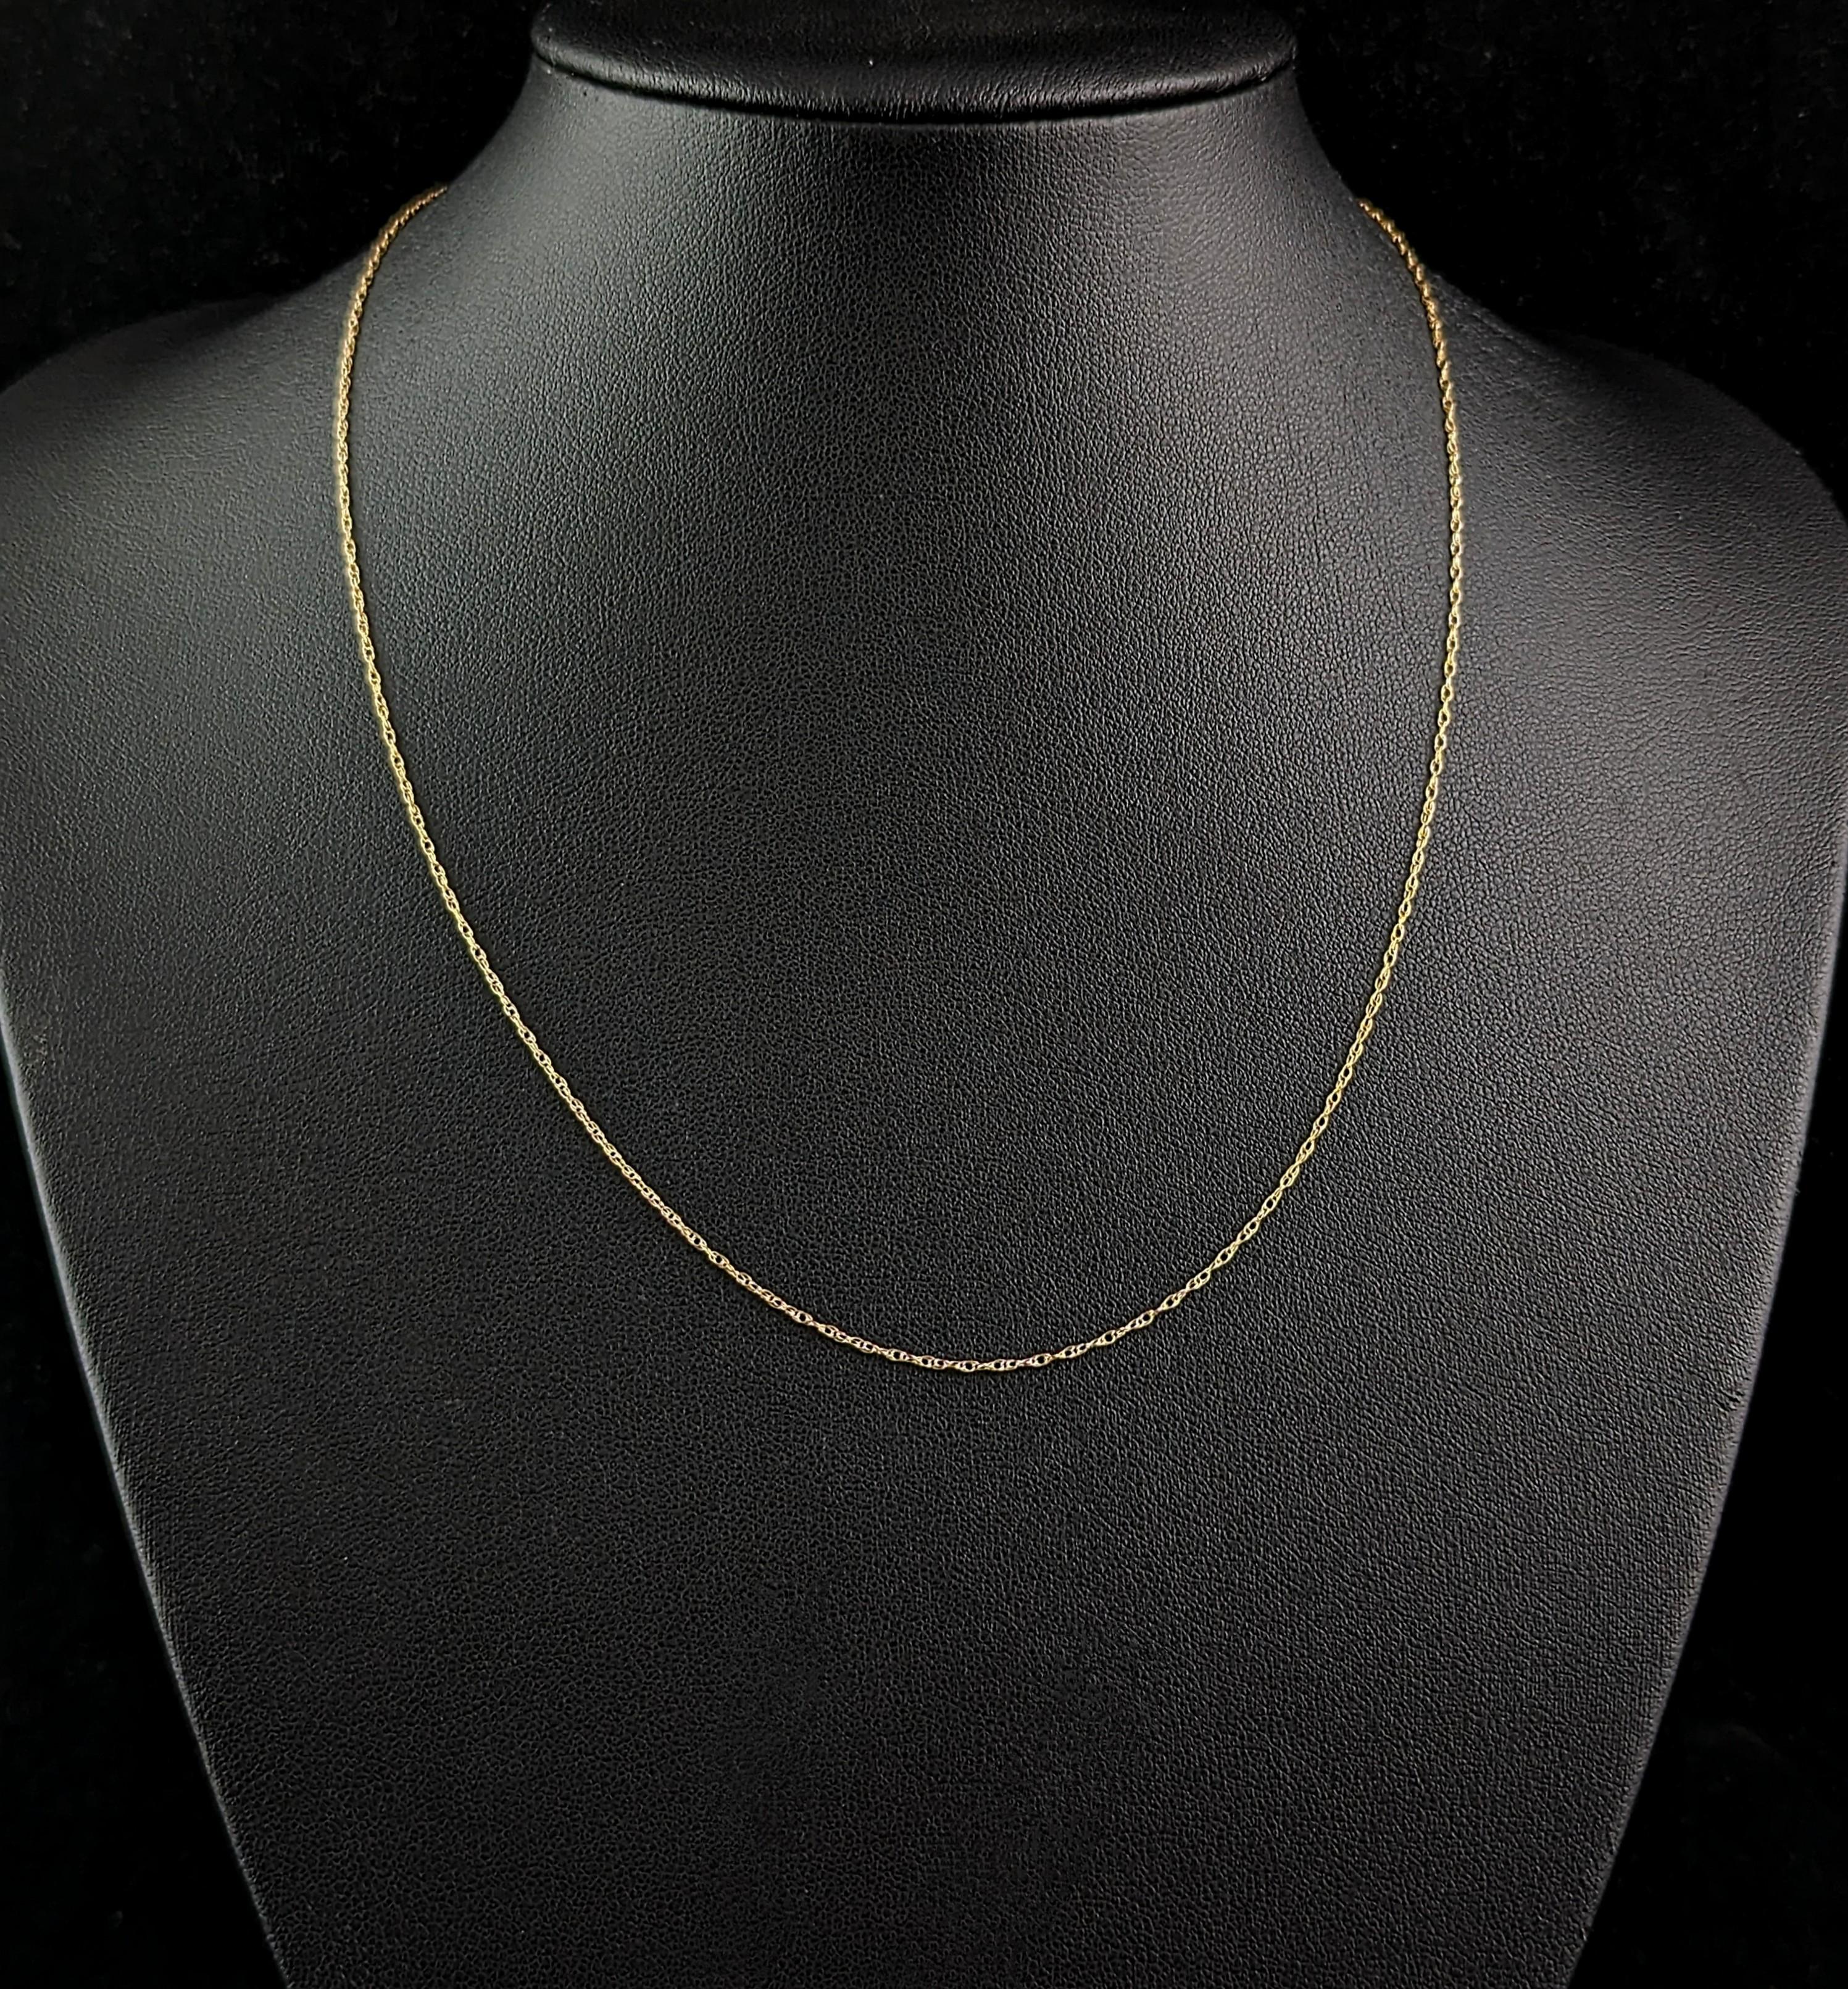 A fine dainty vintage 9ct gold trace chain such as this is the perfect accompaniment to your favourite small lockets, pendants and charms.

It is a fine fancy trace link in a rich yellow gold with a spring ring clasp.

It is a good length and will